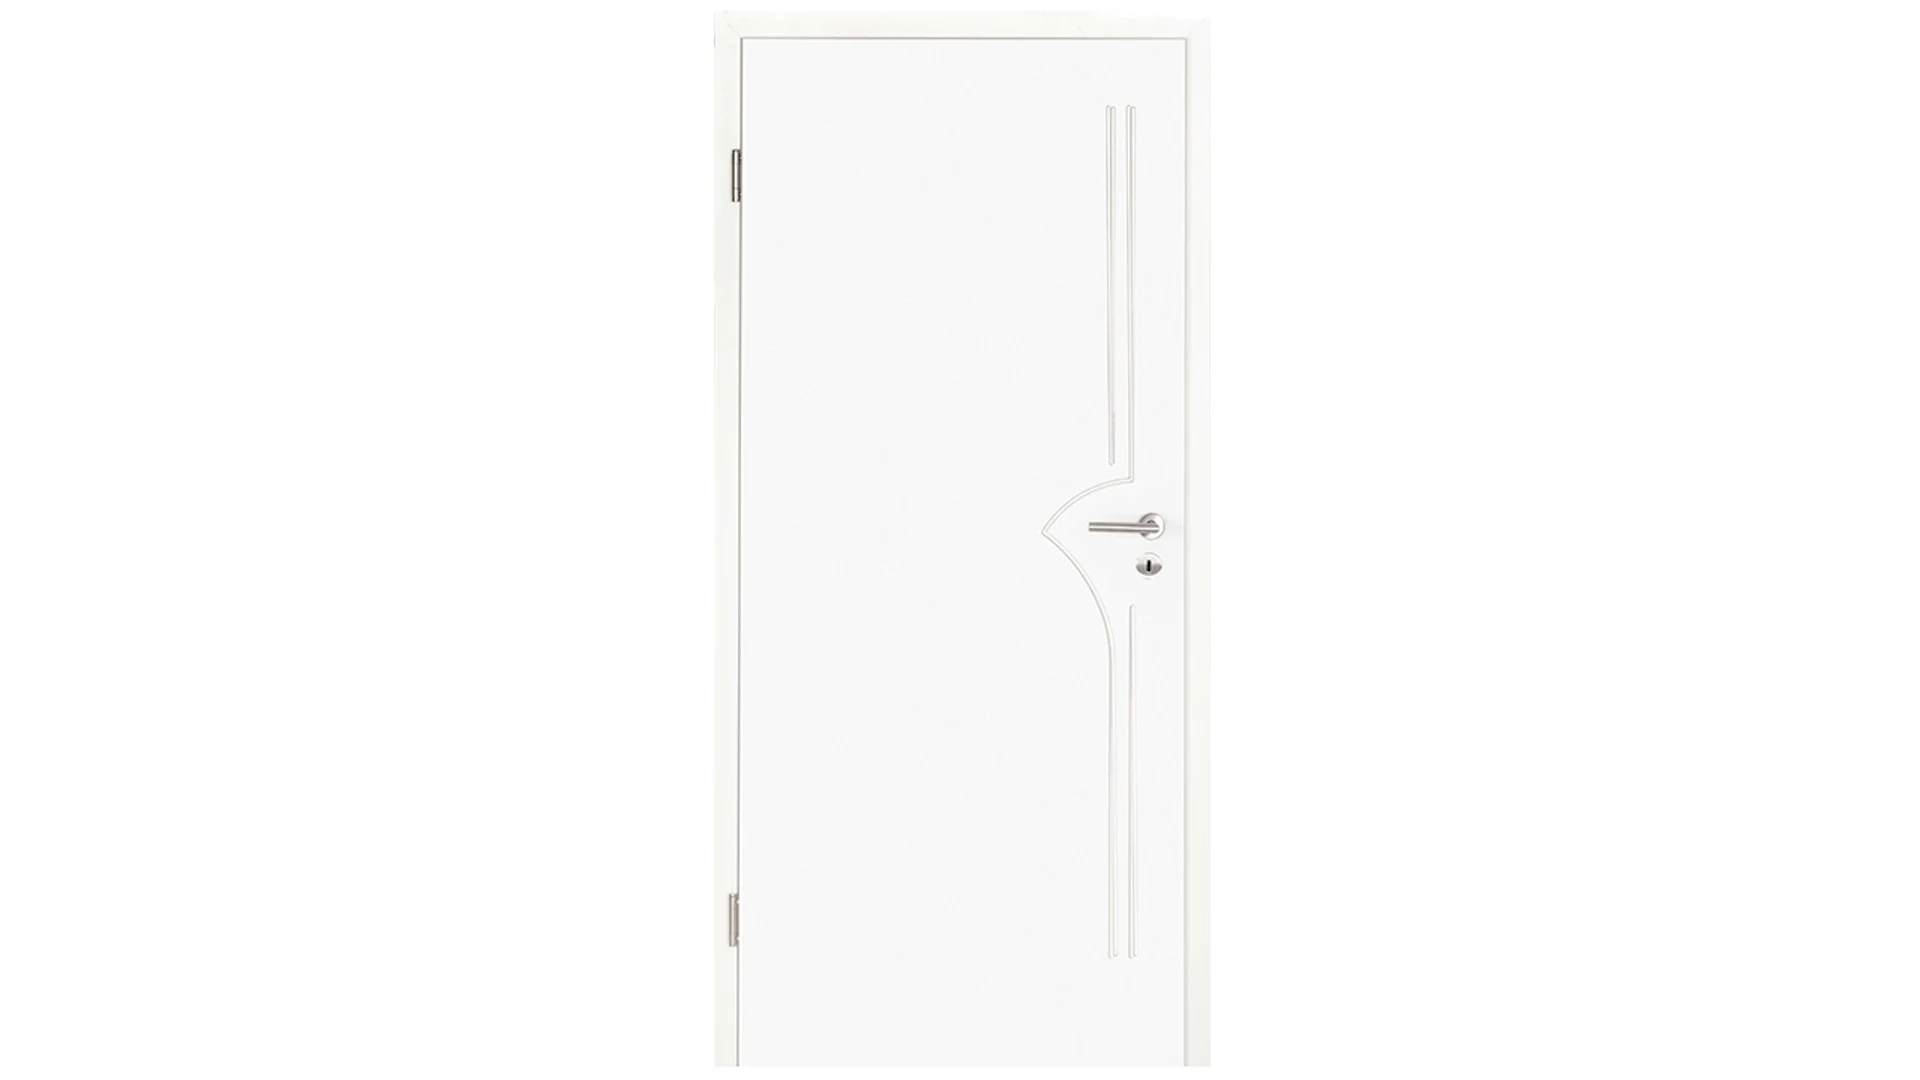 planeo interior door lacquer 2.0 - Kalle 9010 white lacquer 2110 x 610 mm DIN L - round RSP hinge 3-t